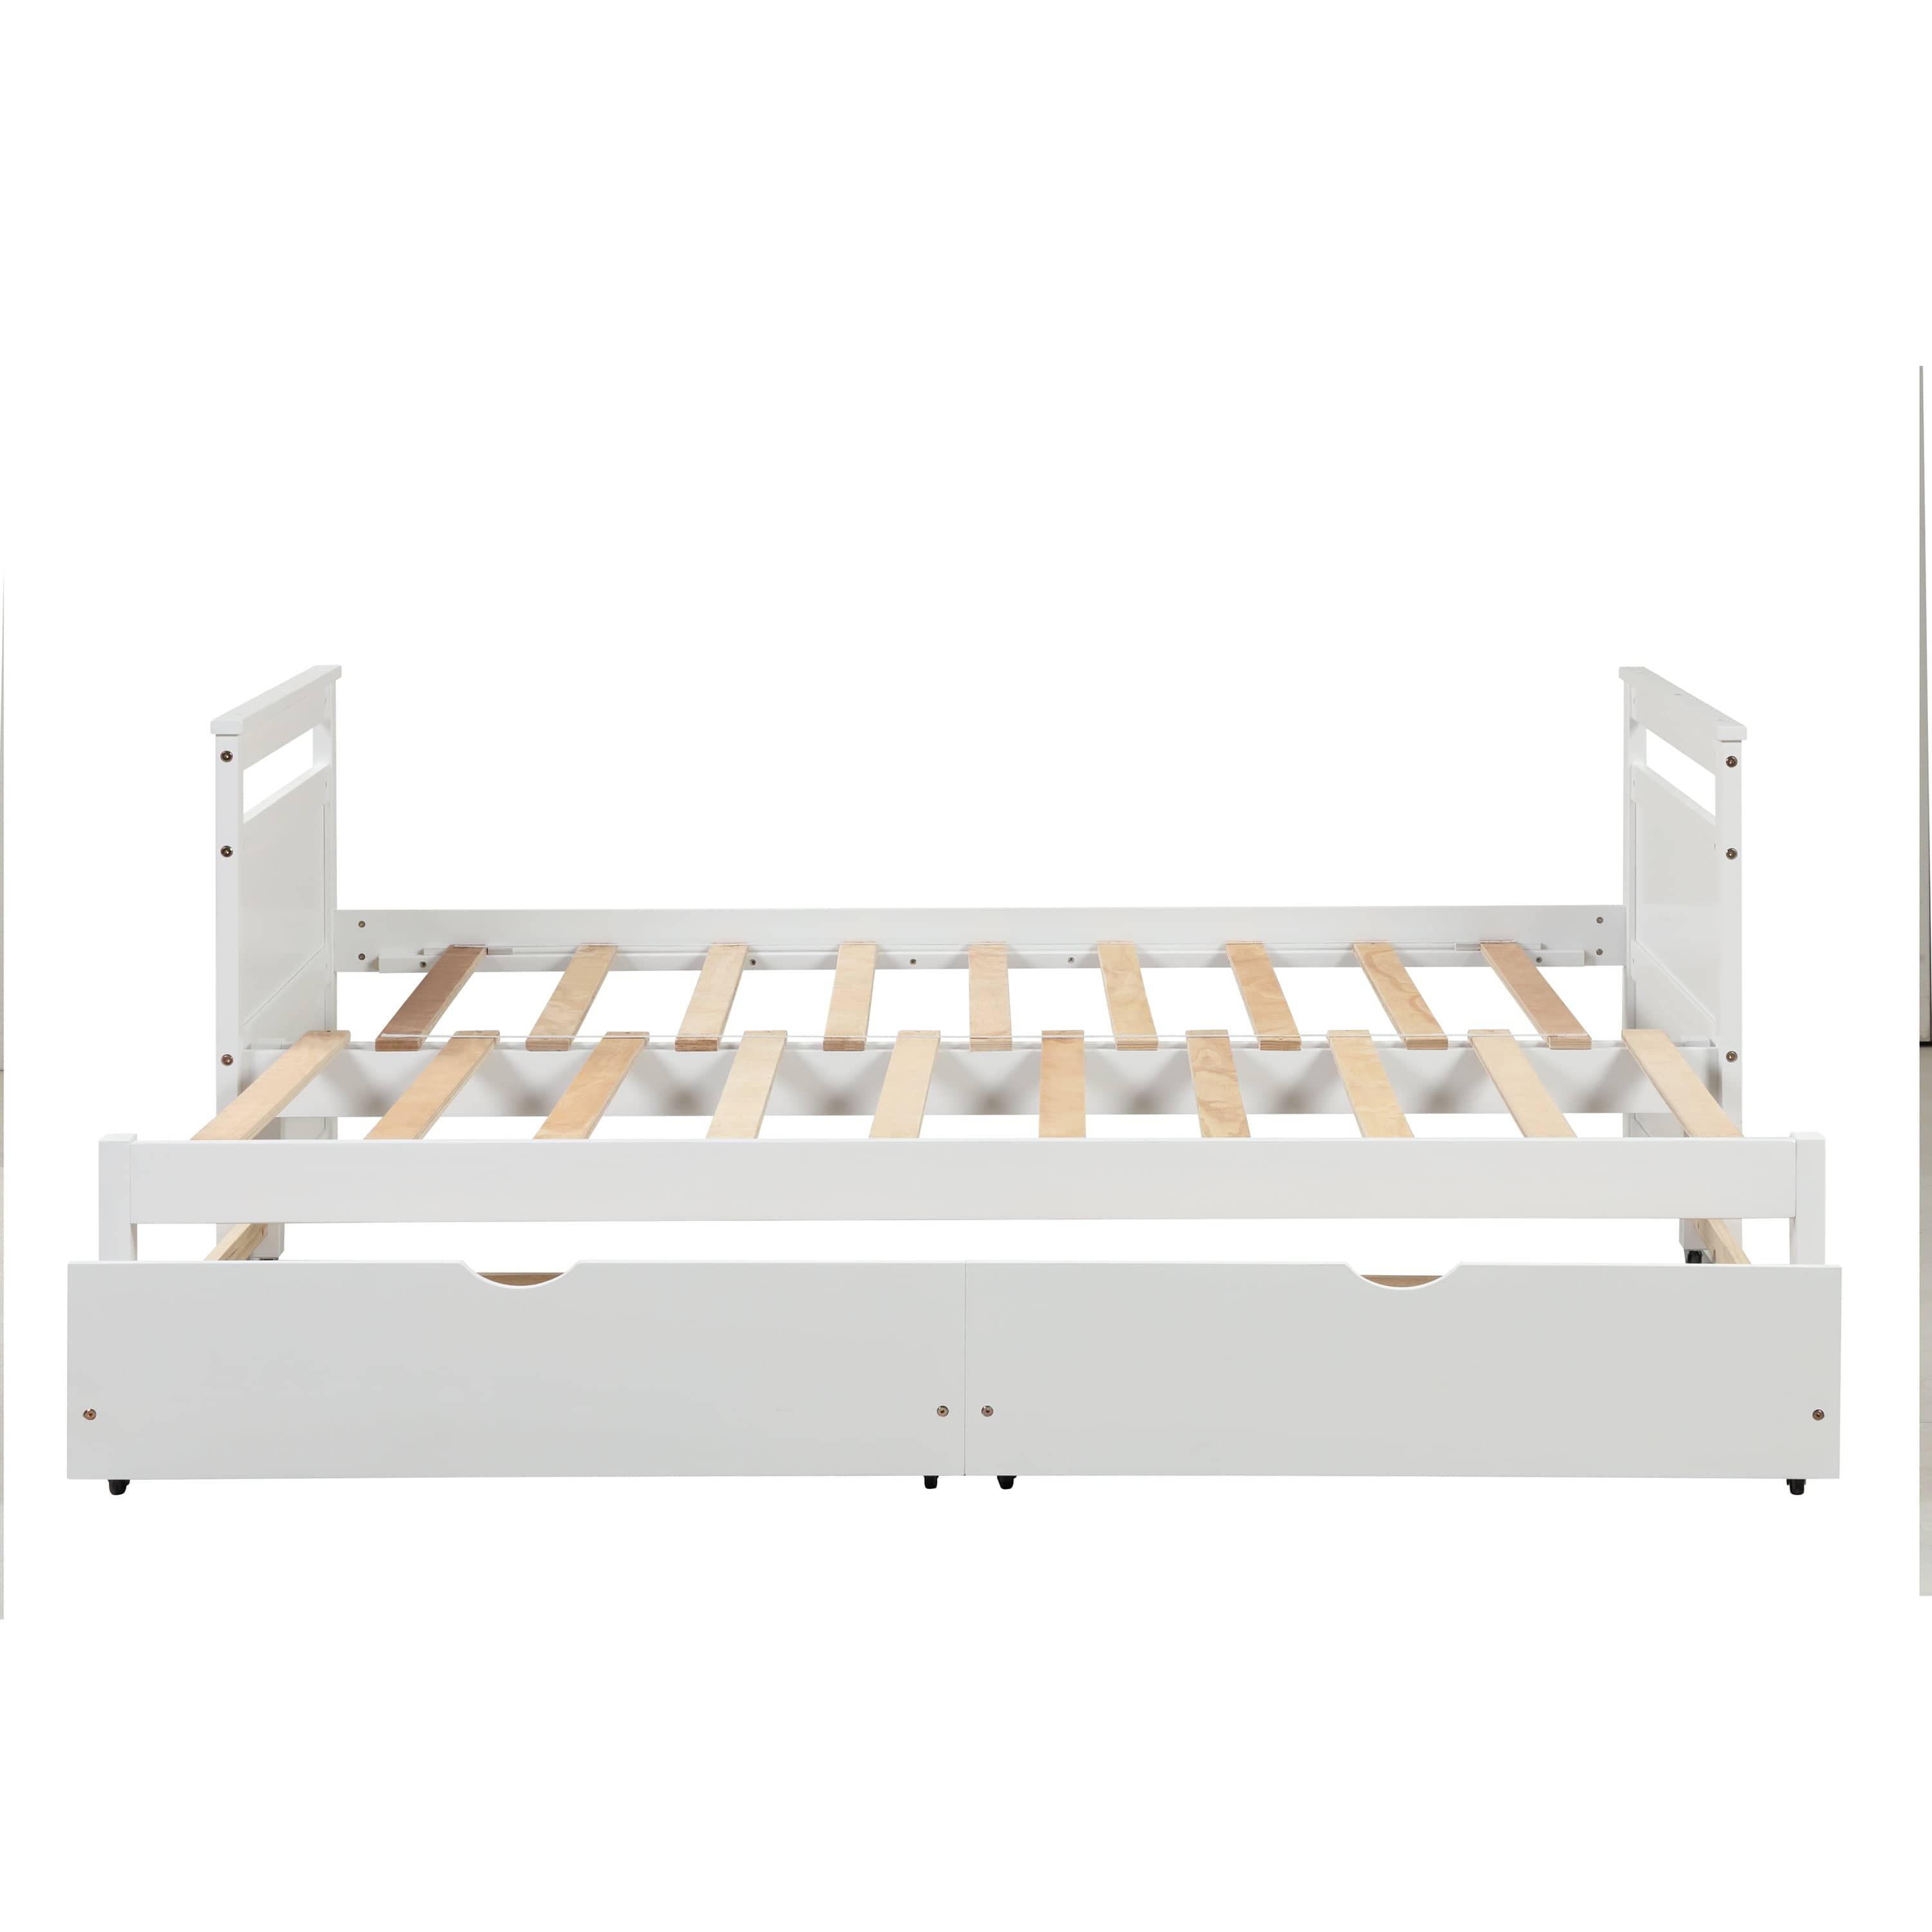 Shop THE TWIN BED CAN BE EXPANDED AND 2 DRAWERS FOR WHITE COLOR Mademoiselle Home Decor